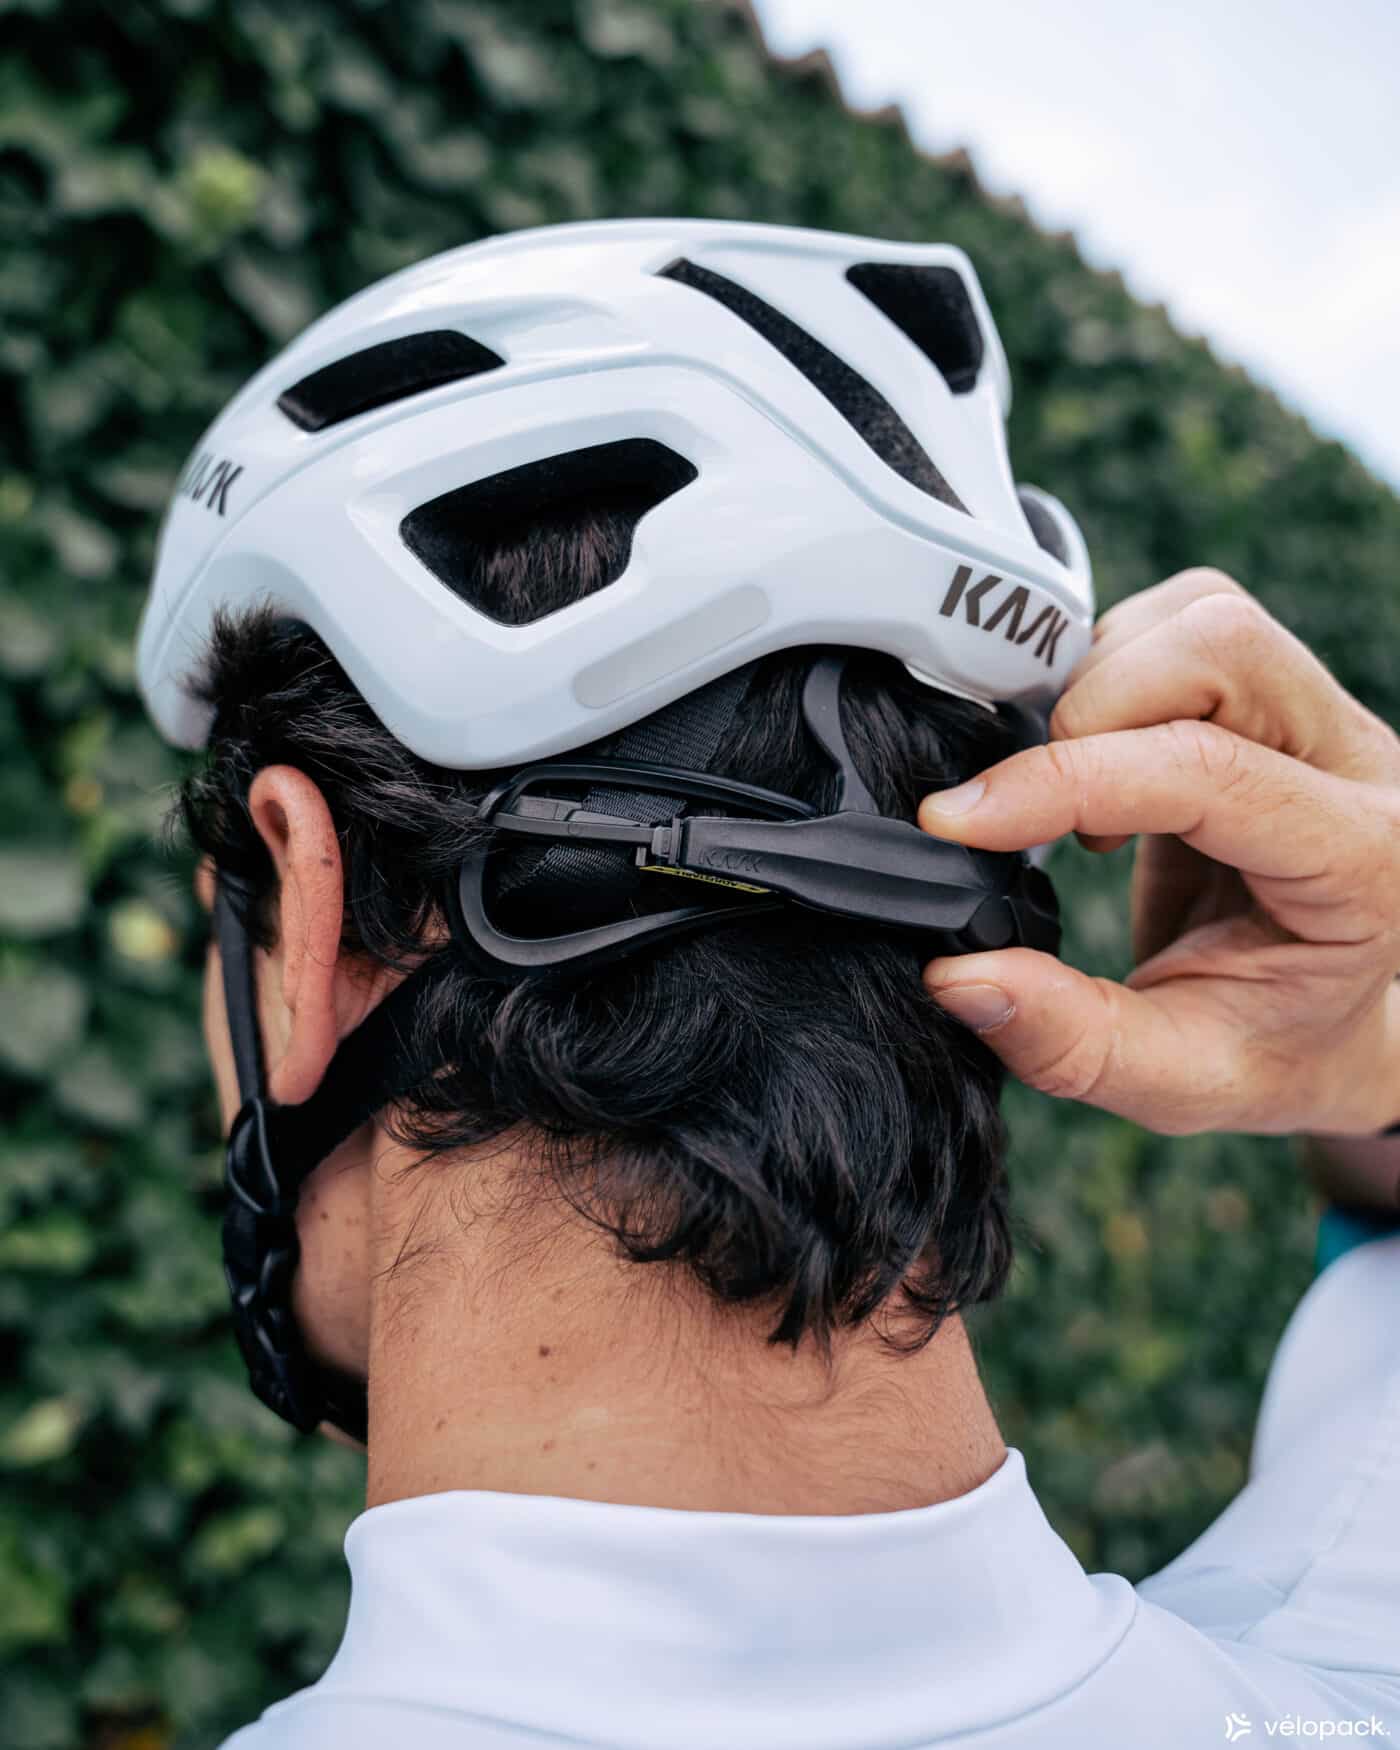 test-casque-kask-mojito-3